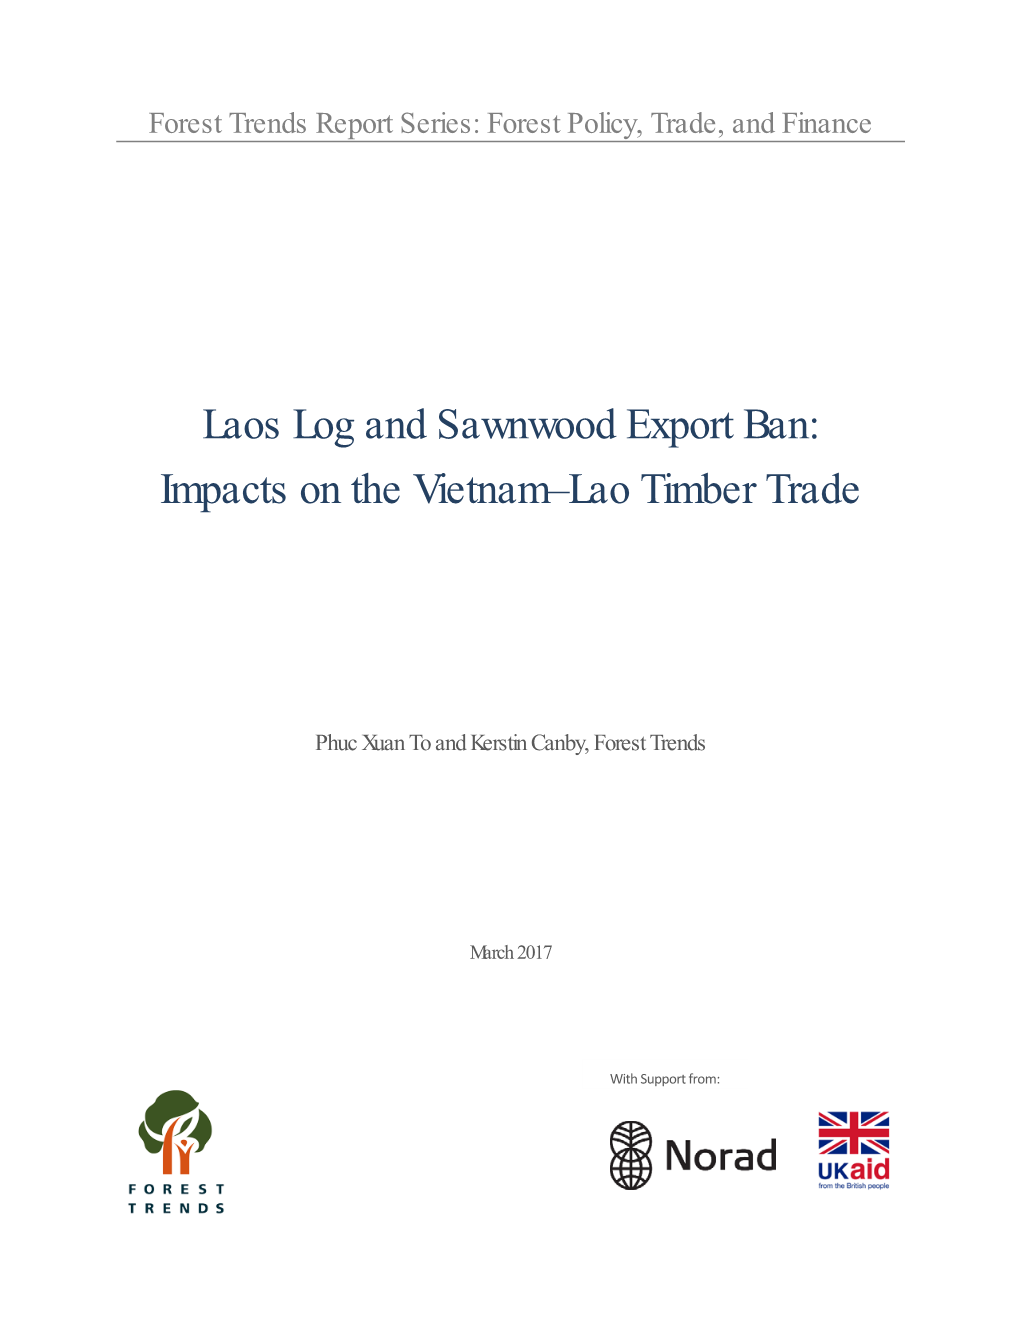 Laos Log and Sawnwood Export Ban: Impacts on the Vietnam–Lao Timber Trade